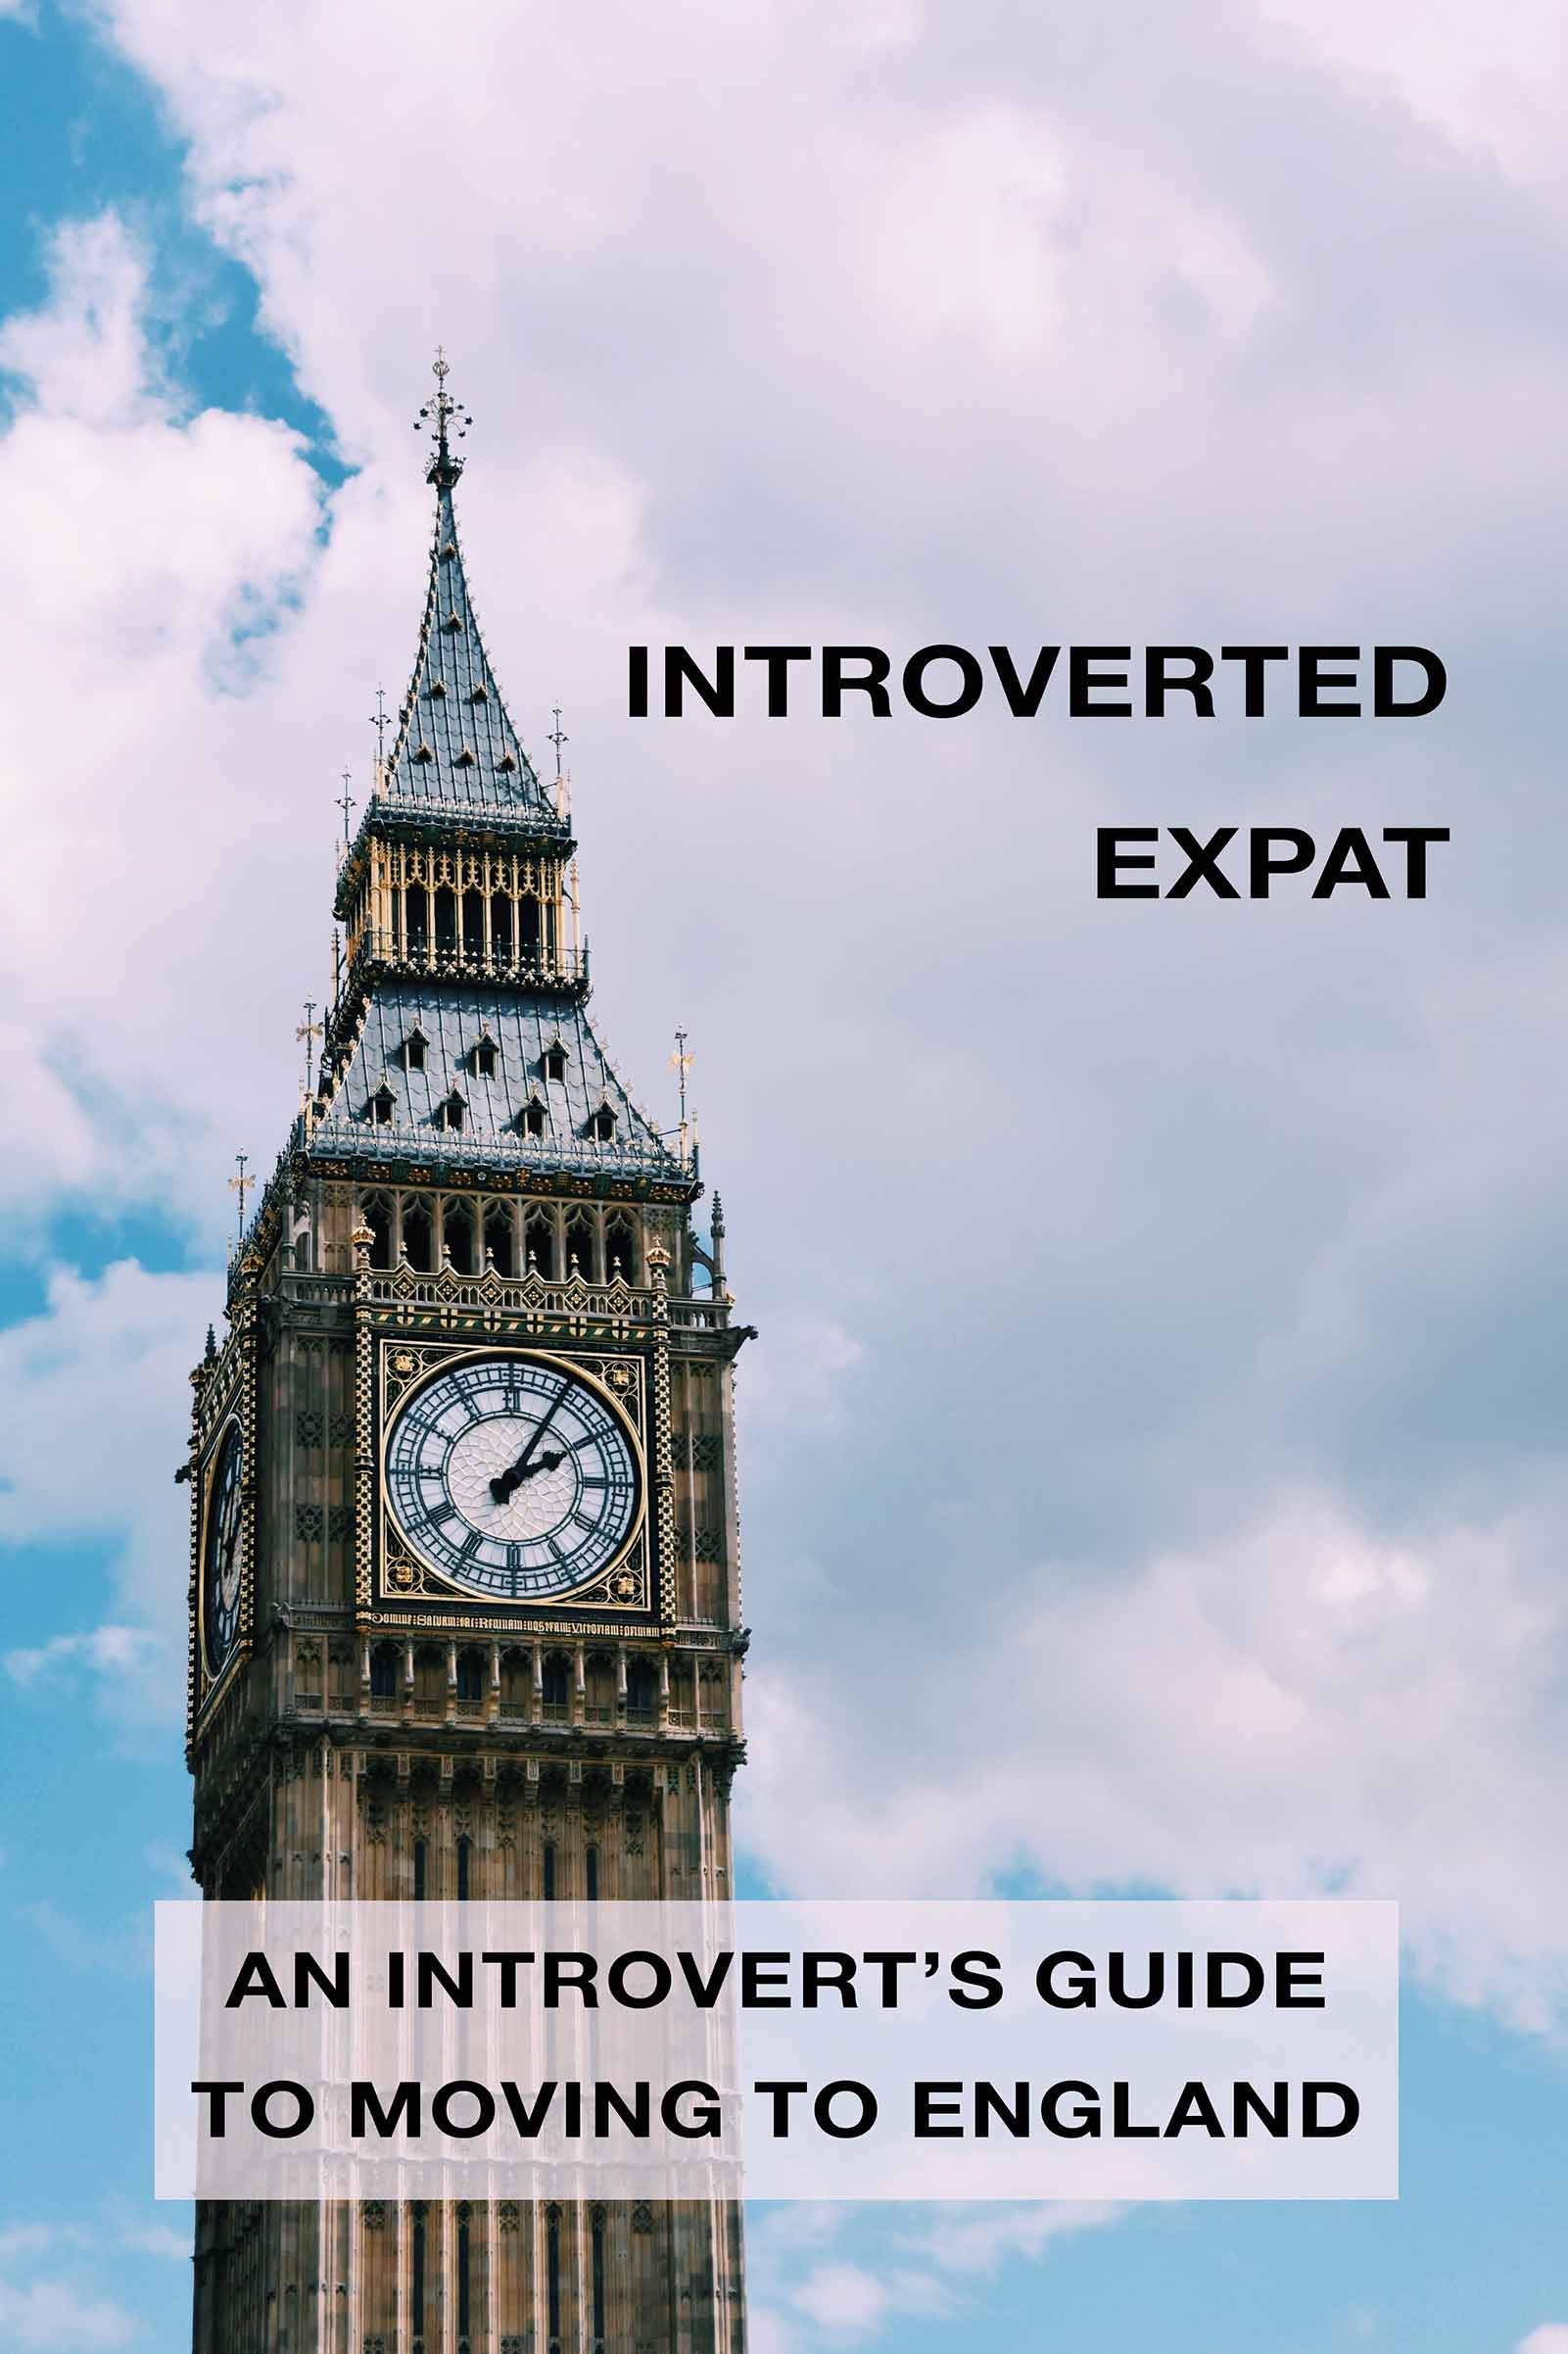 Introverted Expat Ebook - Moving to England